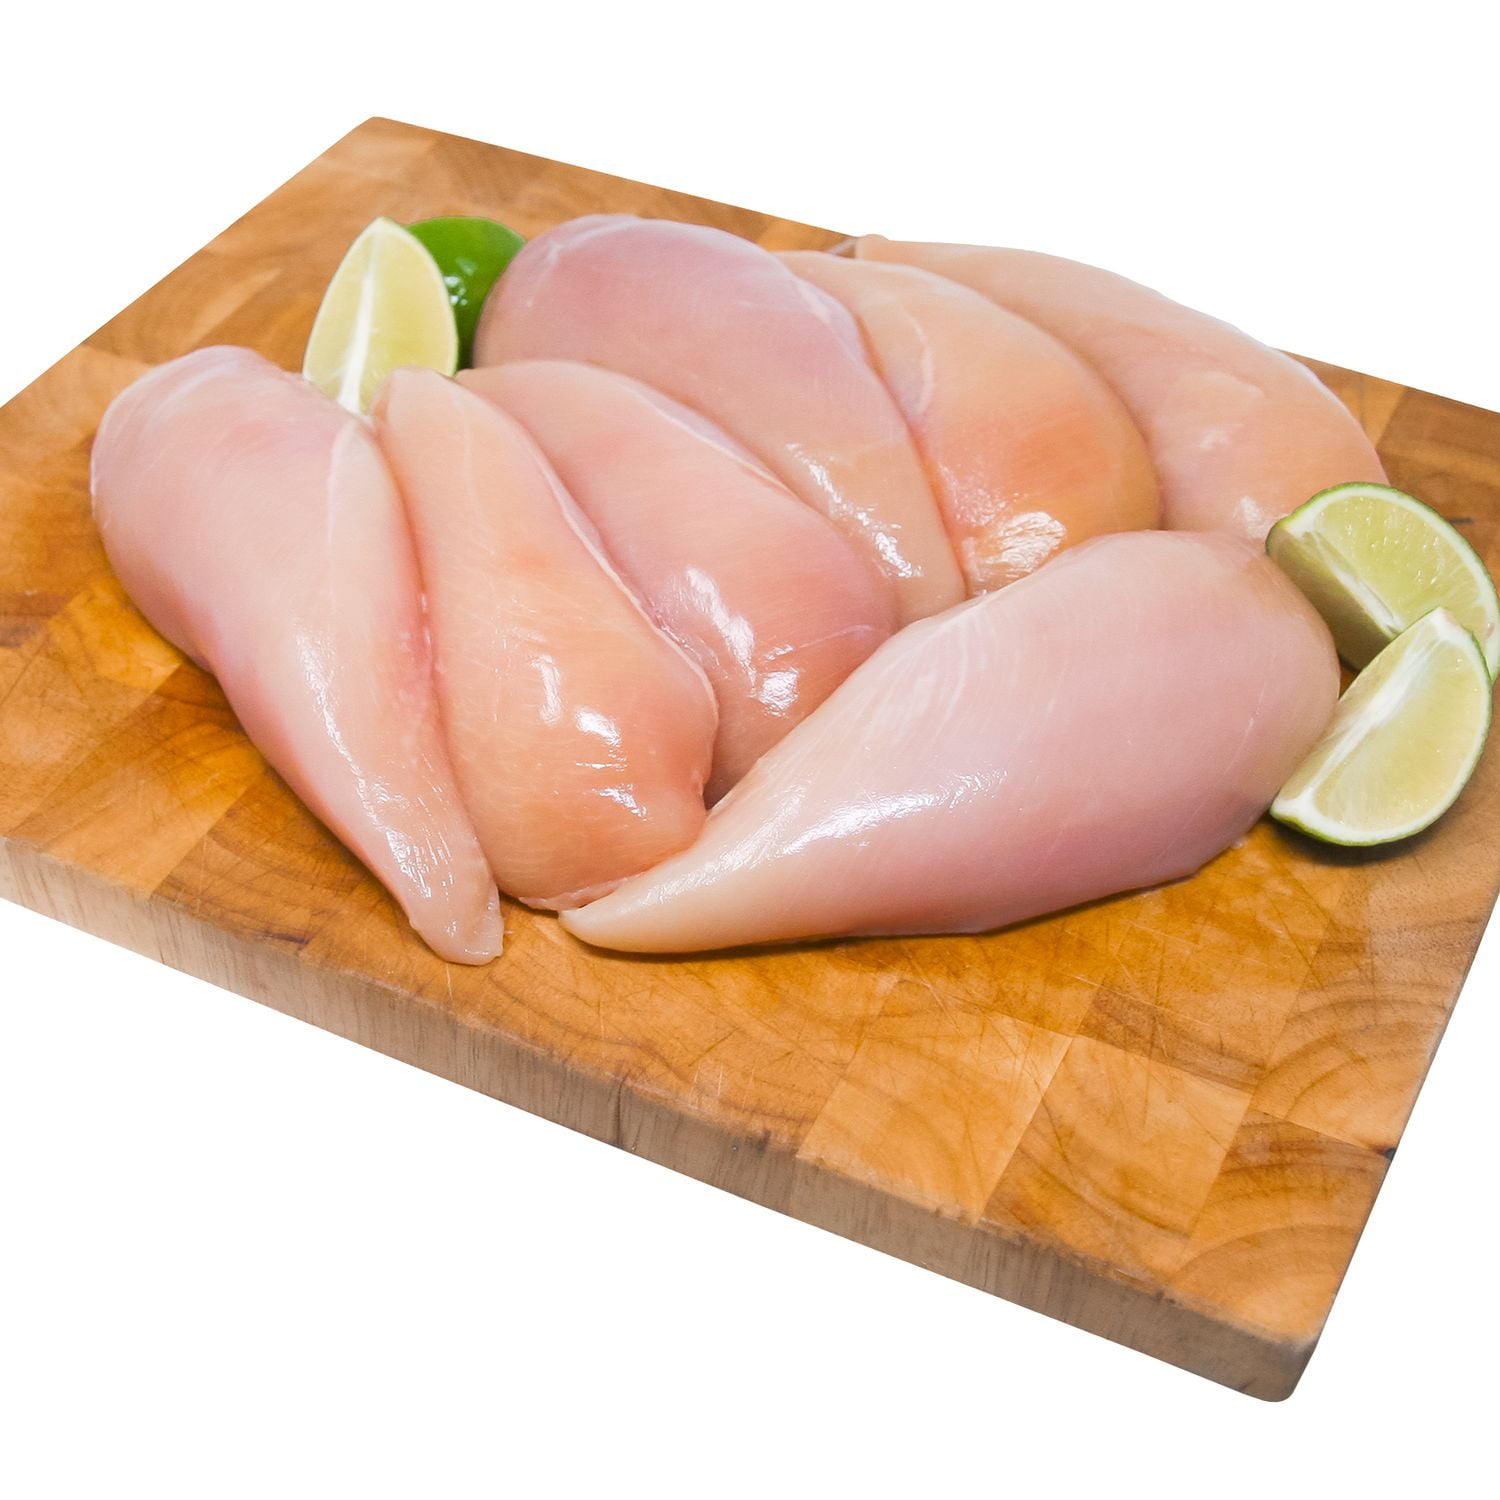 Is it true or not? Eating chicken makes breasts bigger, Ratchasima  Hospital